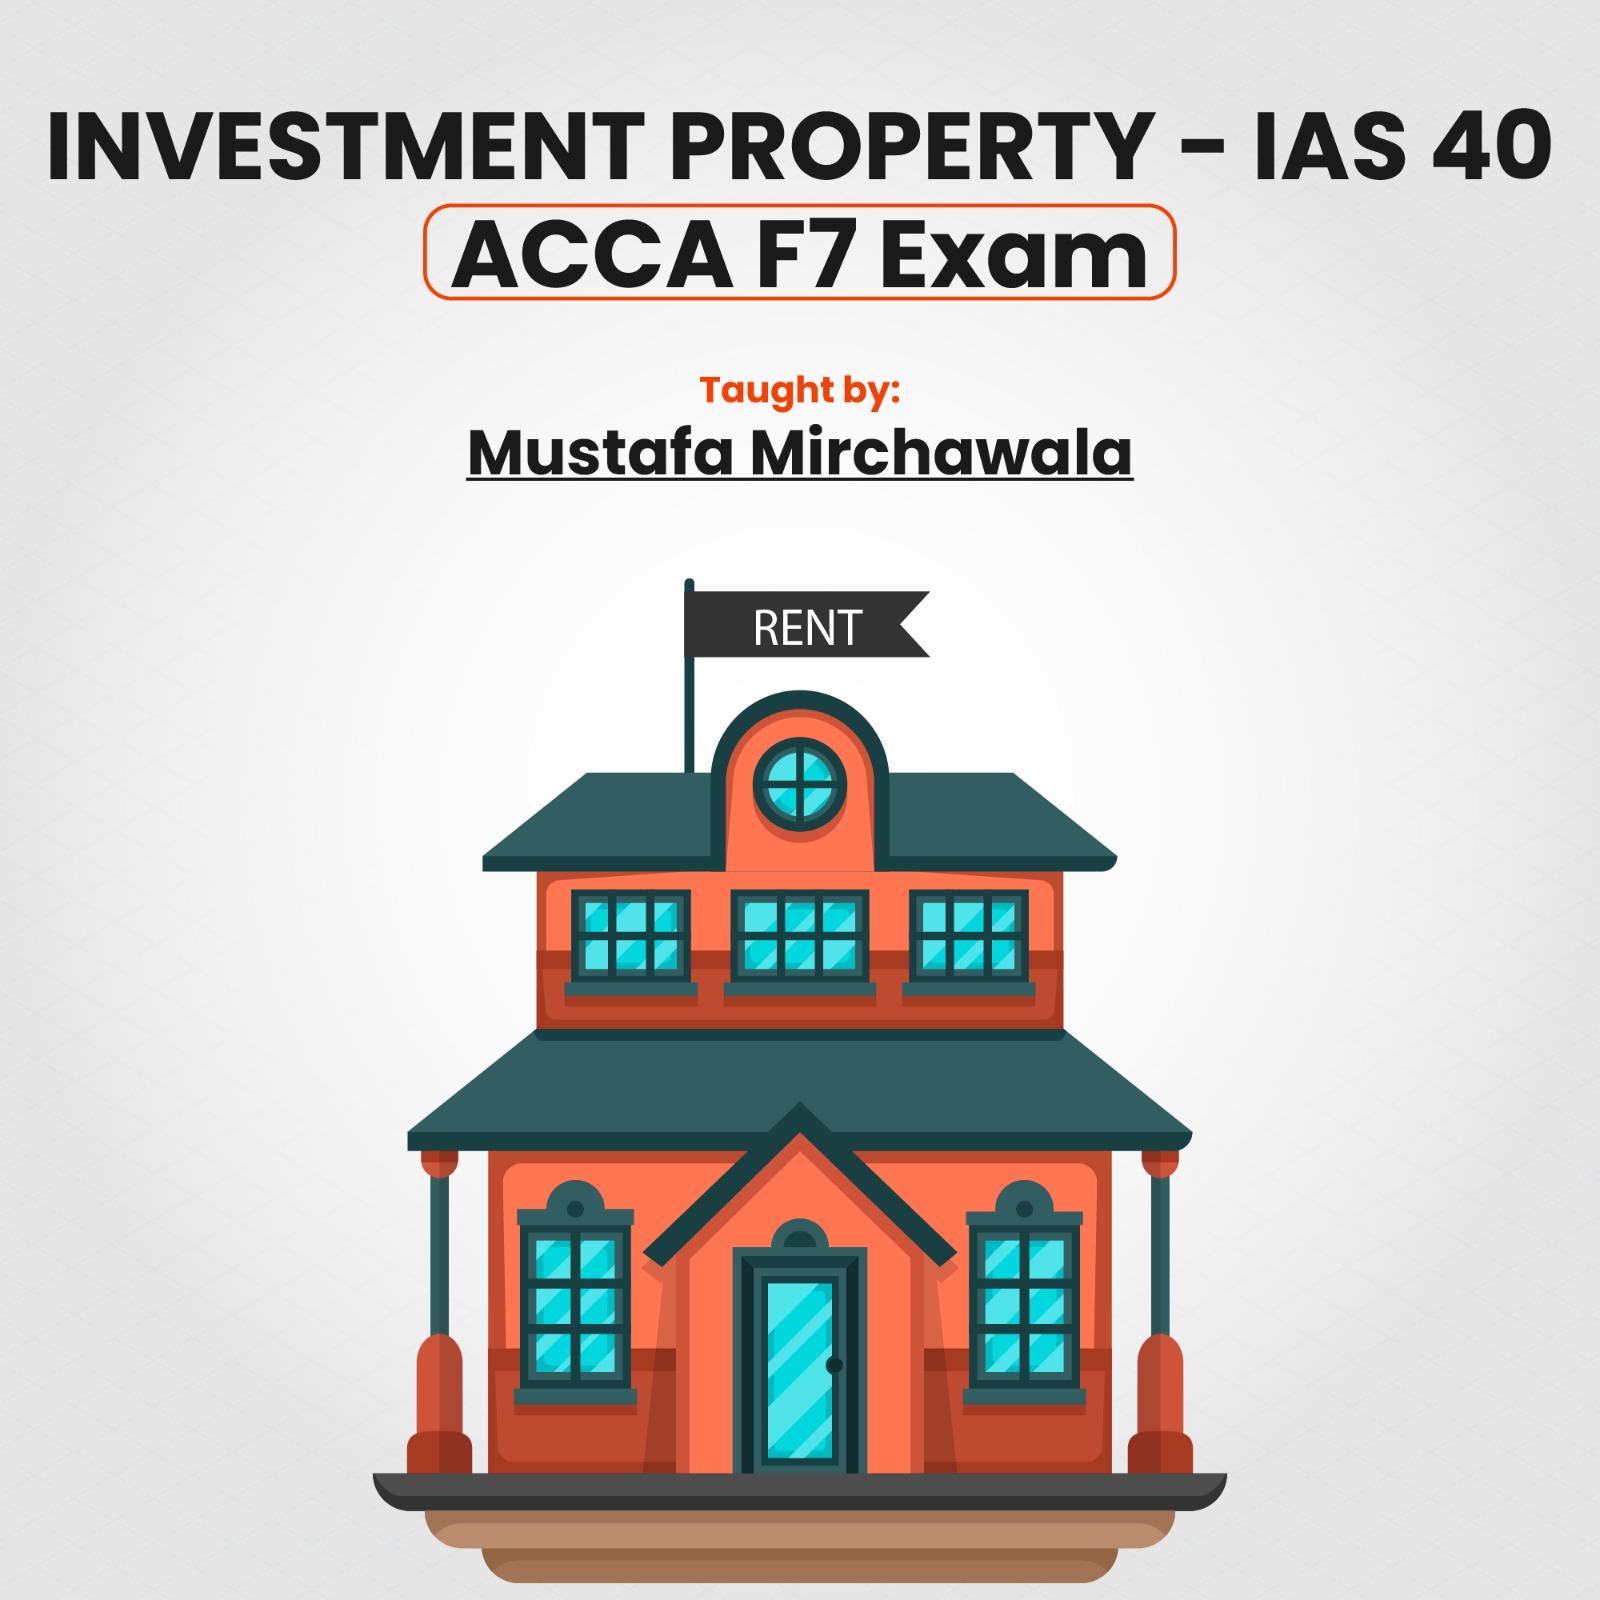 IAS 40 Investment Property for ACCA Financial Reporting (F7)